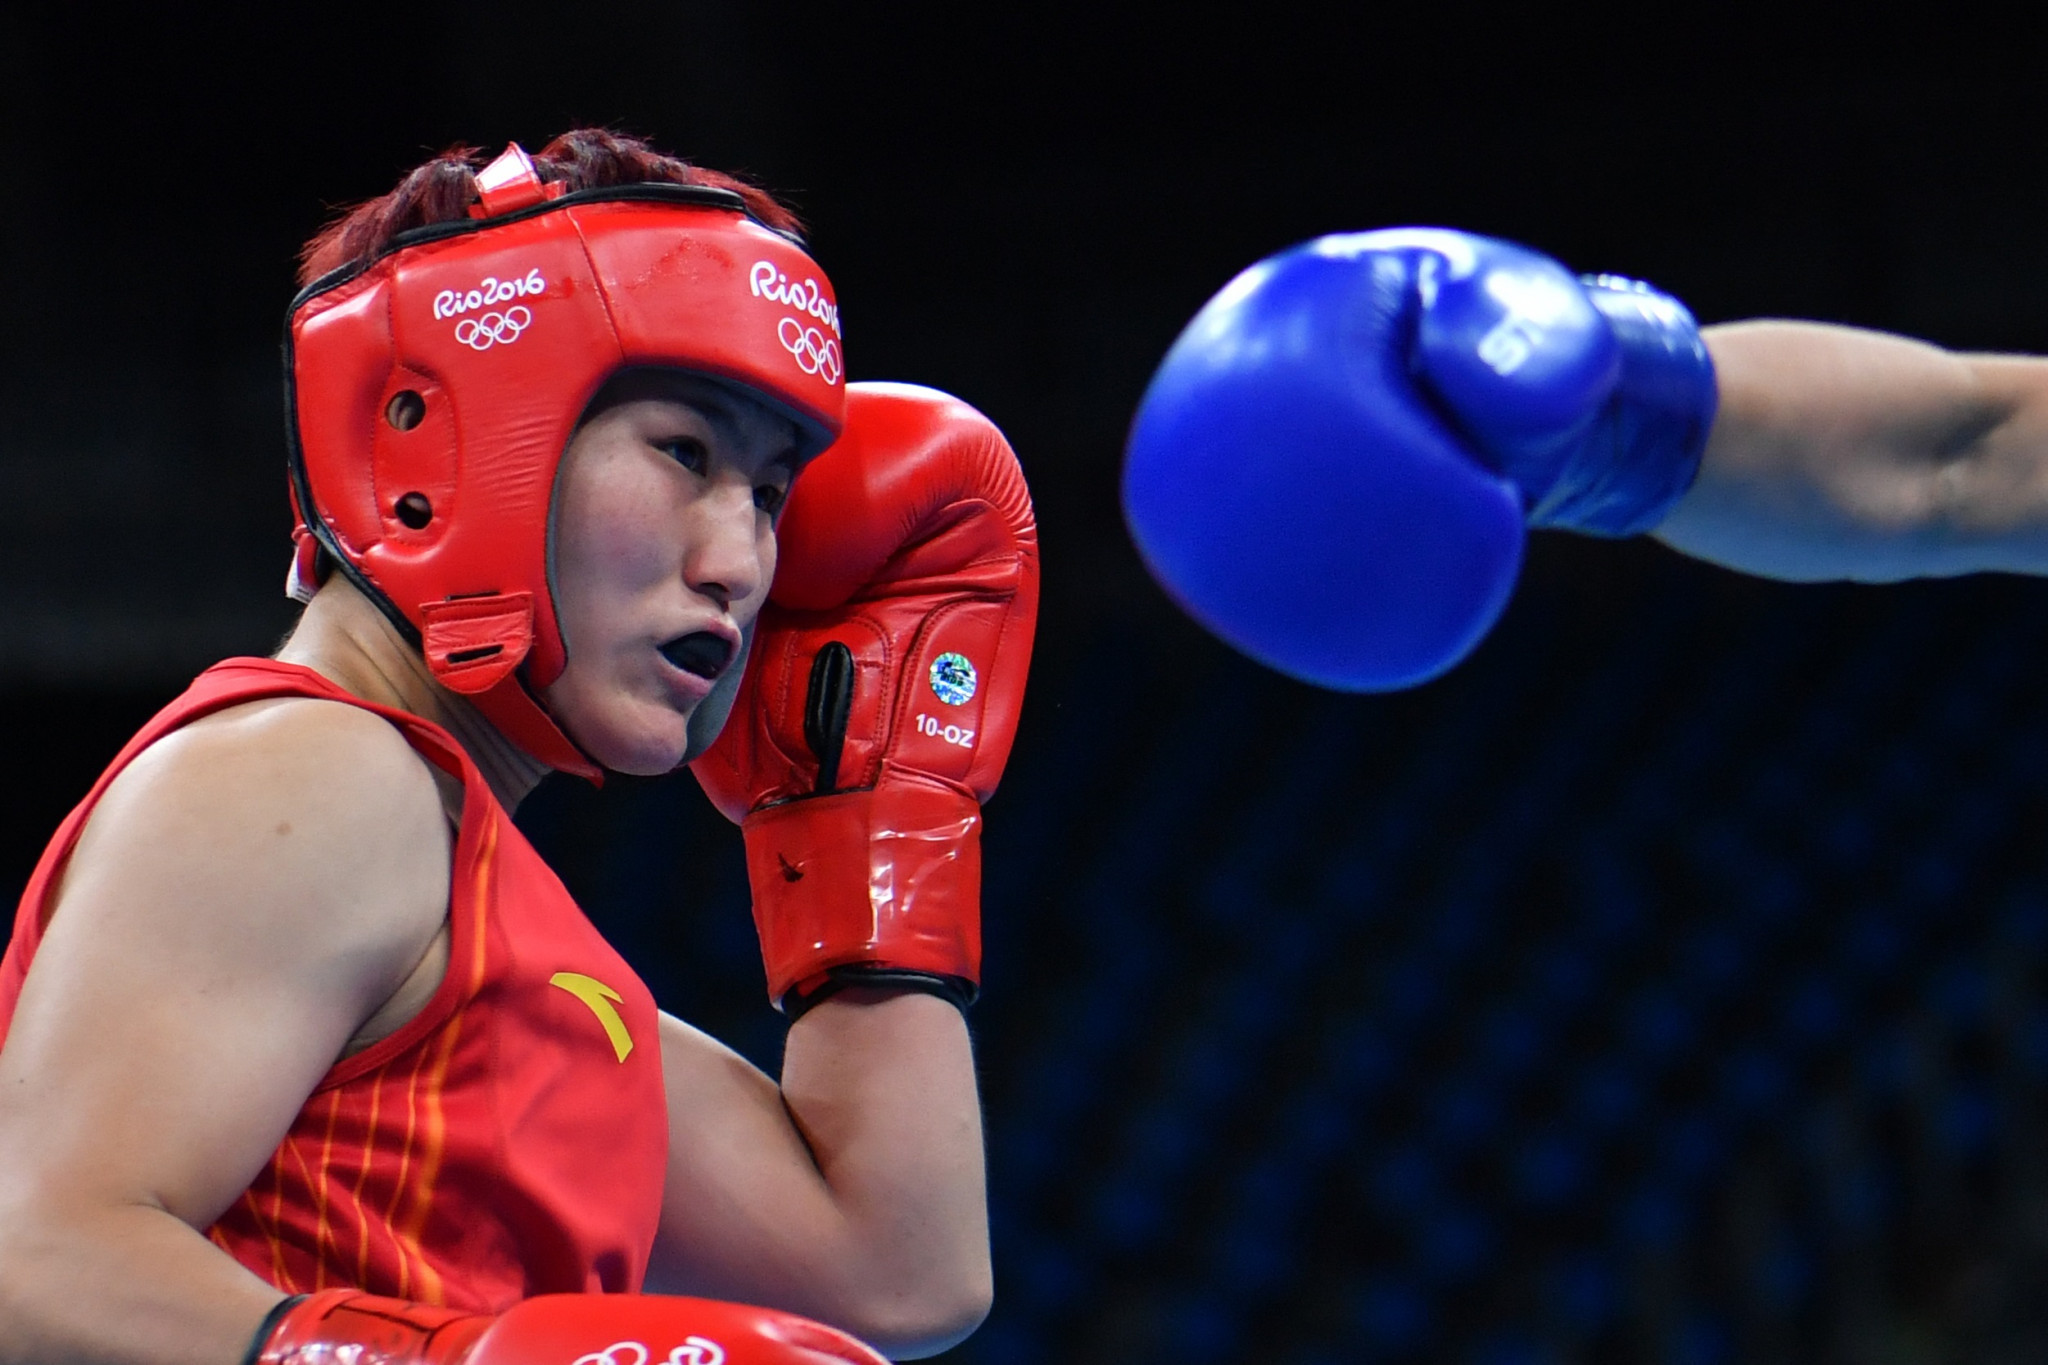 Rio 2016 silver medallist Yin comes through hard-fought opener at Asian Women's Boxing Championships